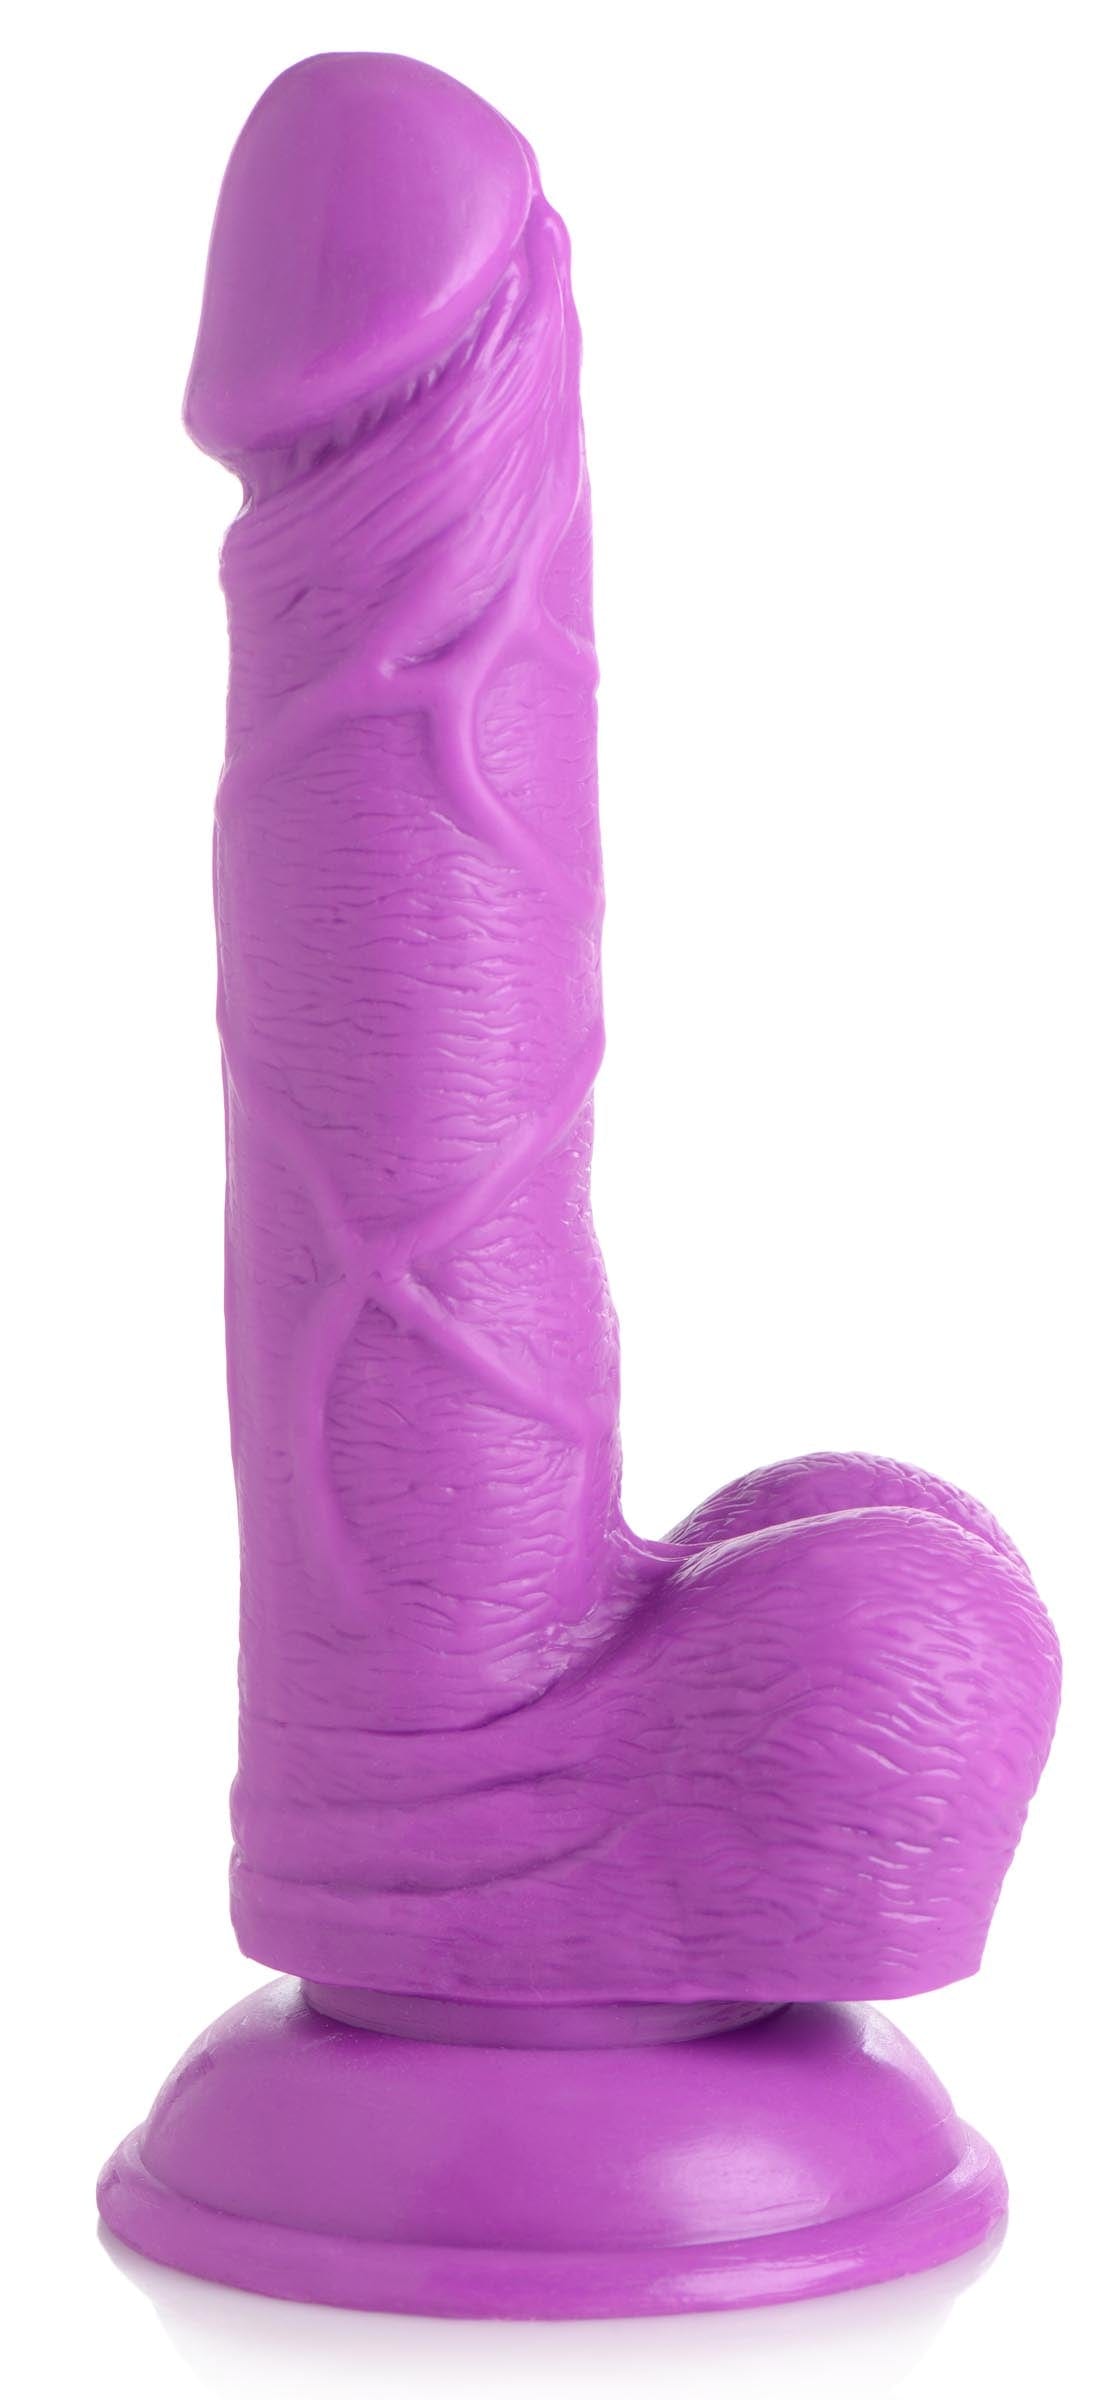 Pop Peckers Realistic Dildo Pop Peckers 6.5" Dildo with Balls at the Haus of Shag